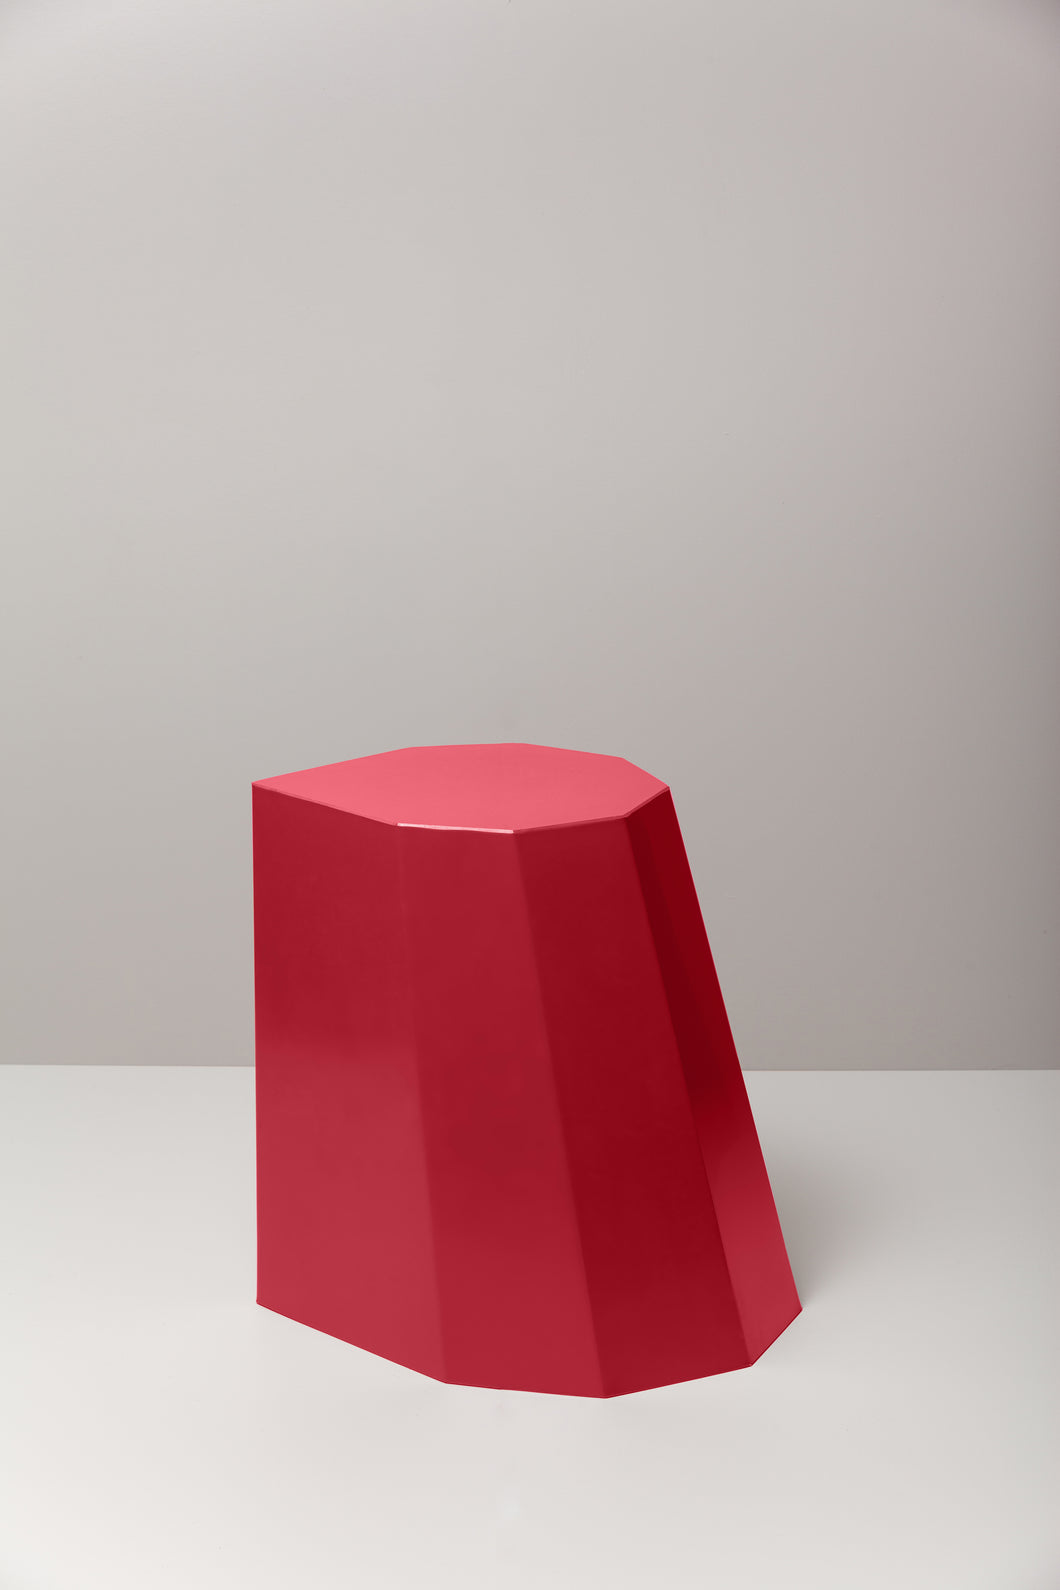 Arnold Circus Stool in Red (pre-order)